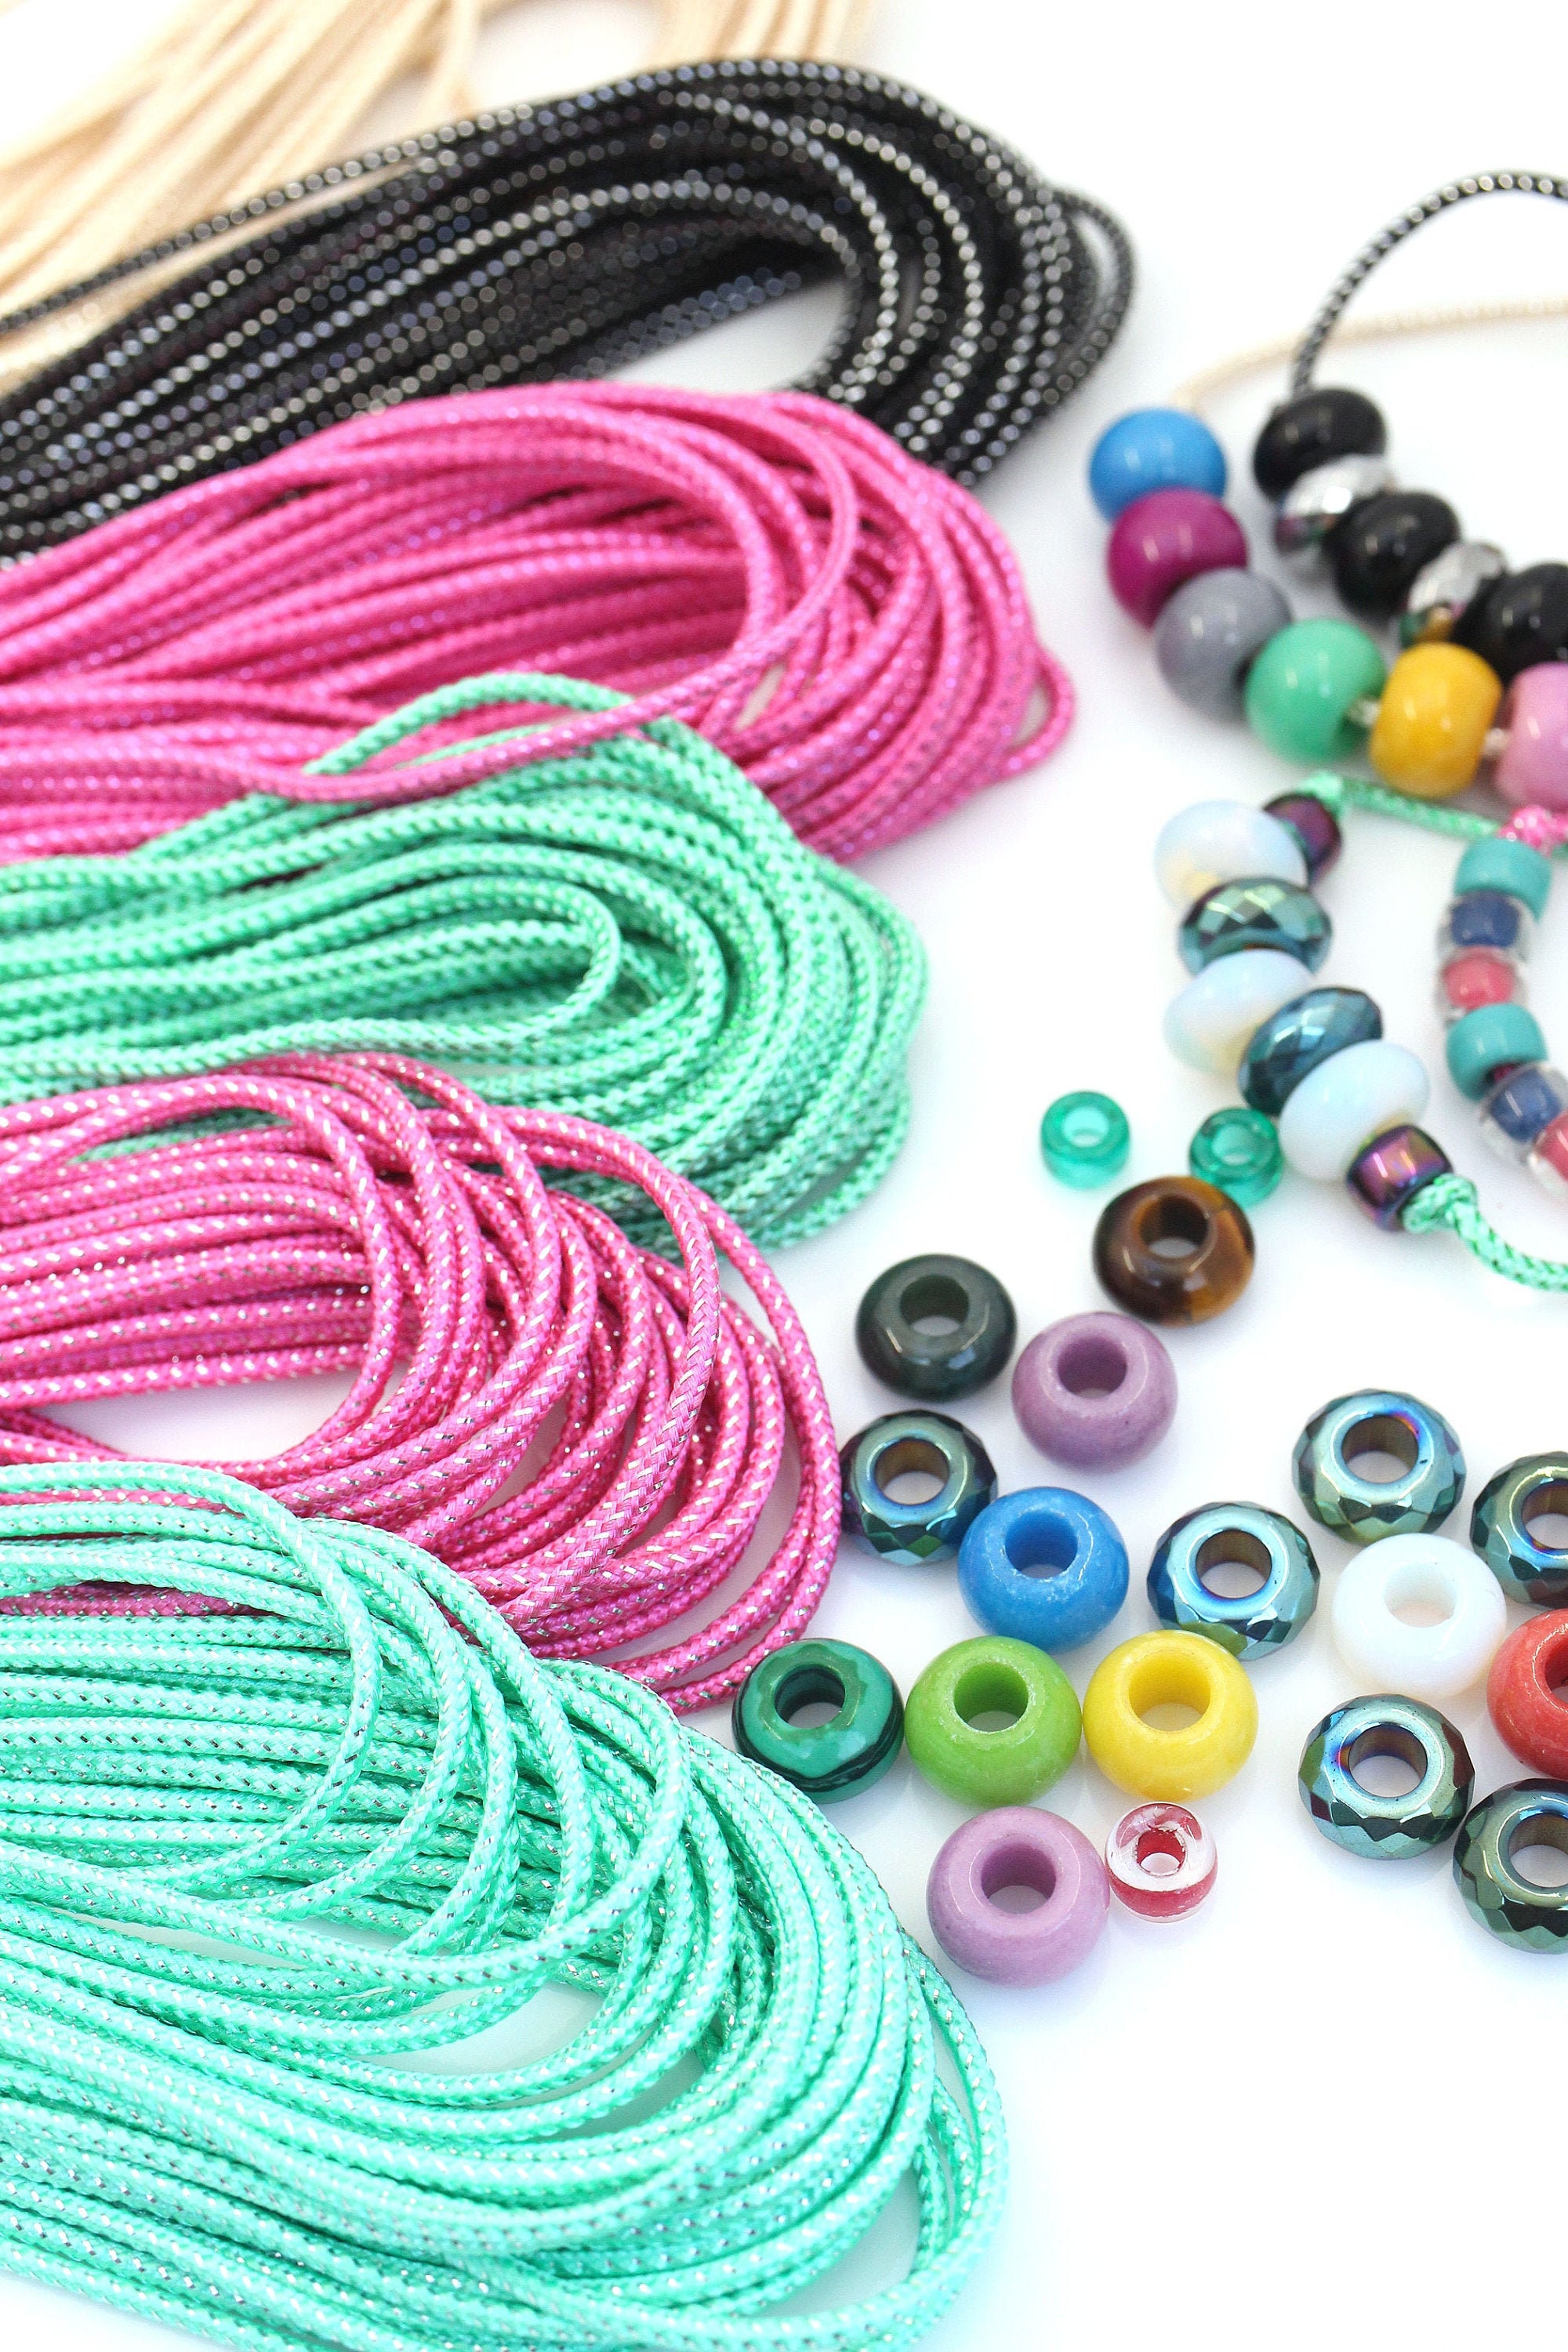 1pc Non-elastic Rainbow Beading Cord, Colorful Crafting Thread String Cord  For Jewelry Making Bracelet Necklace DIY Craft Bead String Beading Crafting  Cords